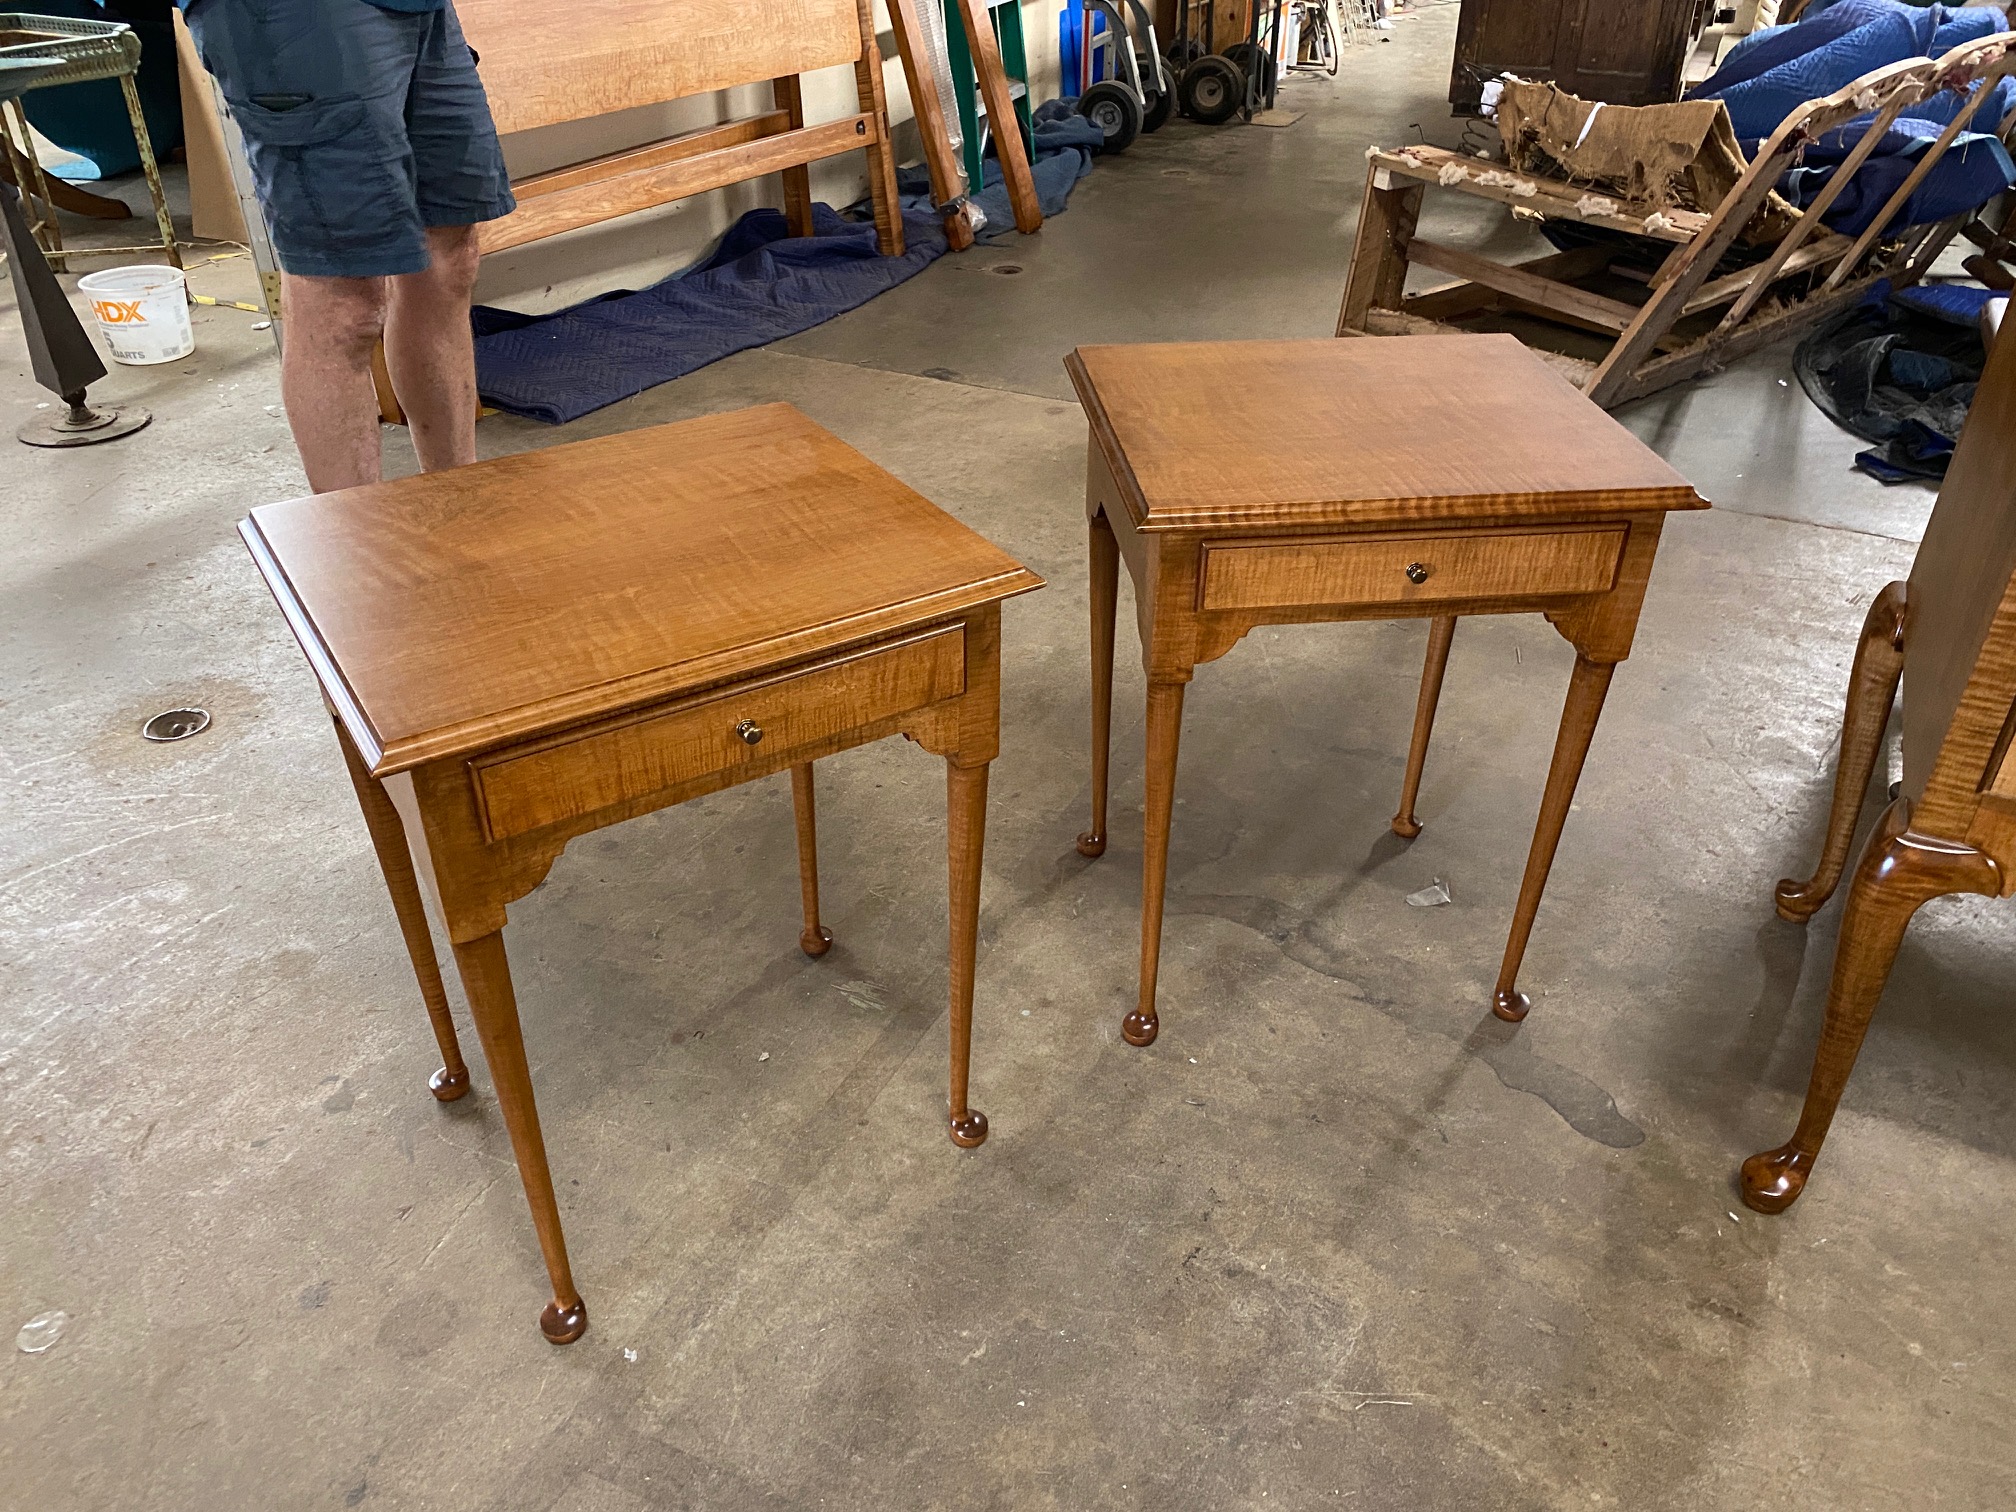 Curly maple side tables built to match heirloom furniture